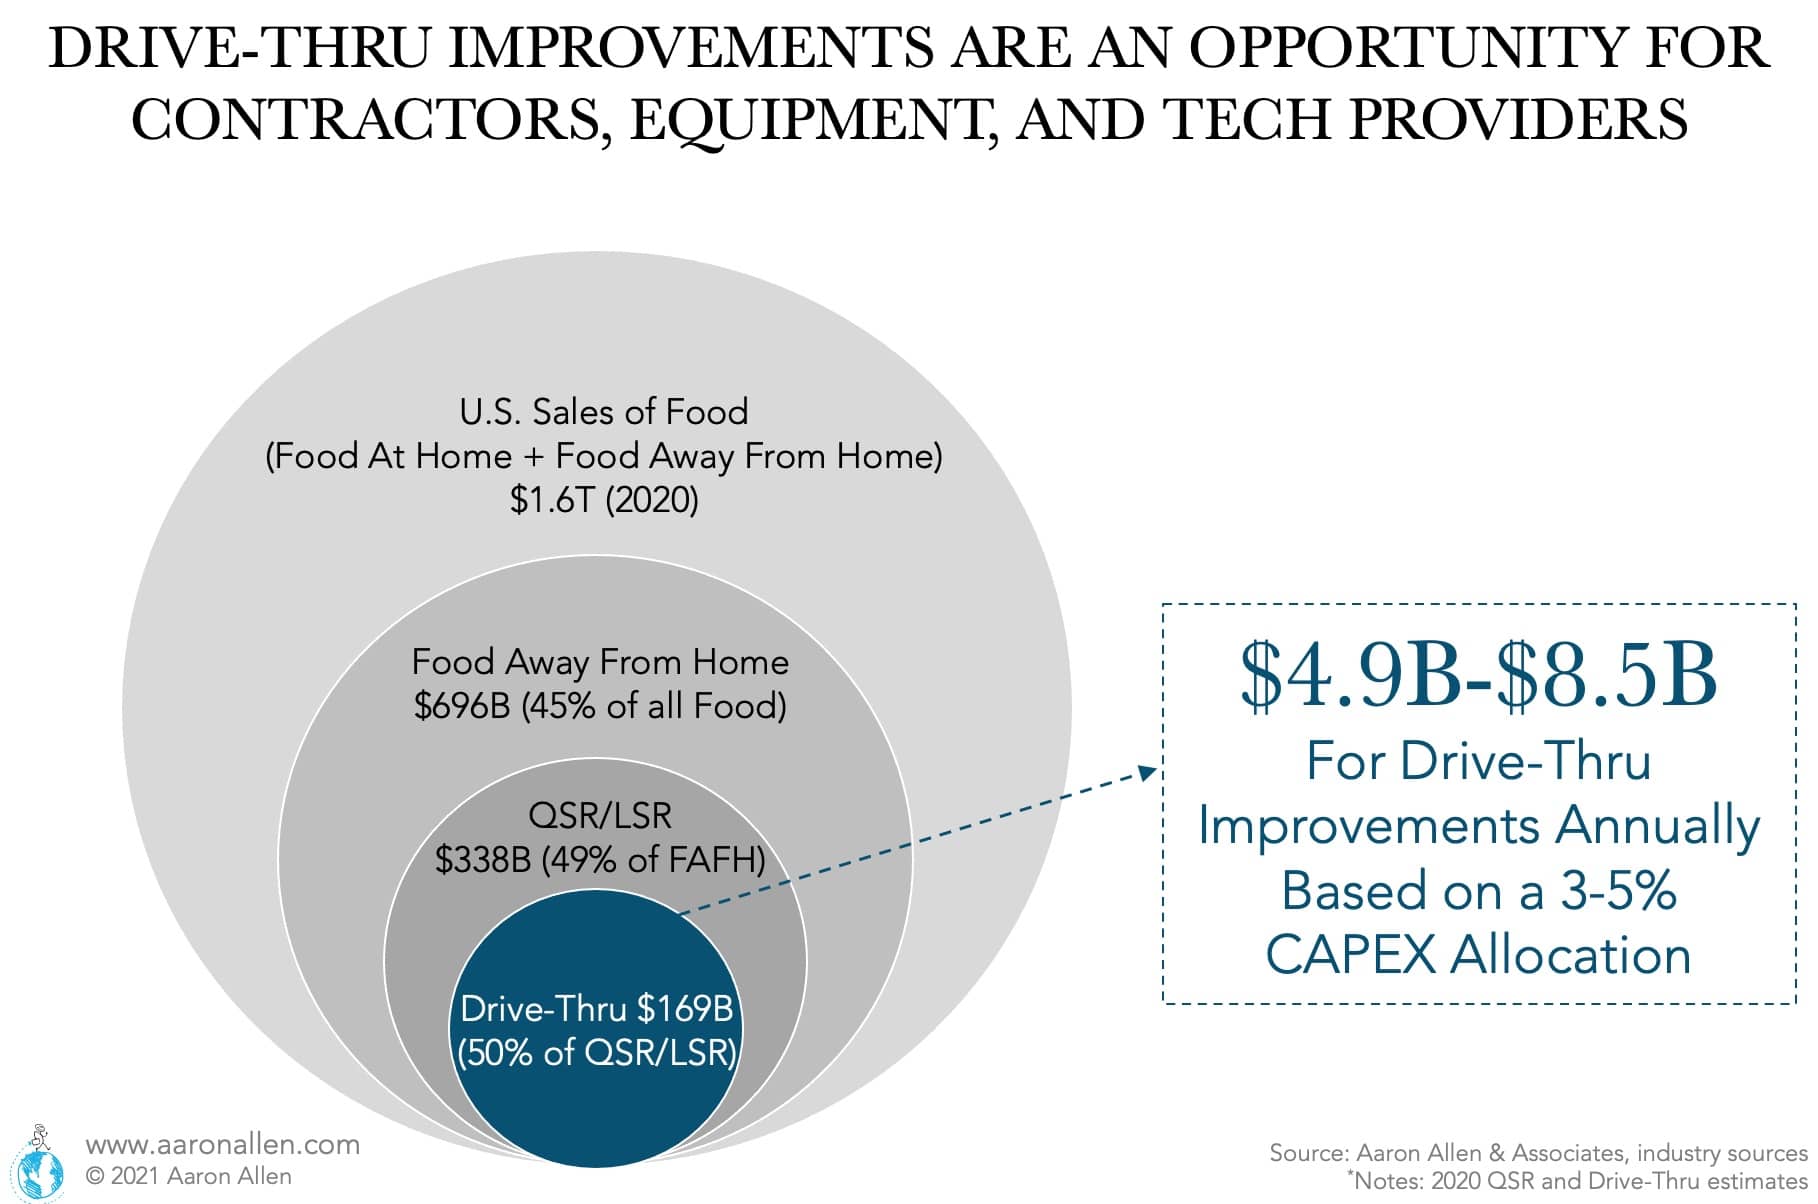 How much will improvements to the drive-thrus mean over the next few years? In the U.S., half of the food consumed is served at restaurants (Food Away From Home) and about half that is at quick- and limited-service operators. QSR and fast-casual chains with drive-thrus usually see between 50-70% of sales via the drive-thru.   Considering 3-5% CAPEX allocations (equivalent to the industry median and top-quartile), there would be a resulting TAM of $4.9B – $8.5B in drive-thru improvements (including contractors, equipment, and new restaurant technology) annually. Drive-thrus are only one case study that can serve as inspiration to the back-of-house. There is an opportunity to combine smart features into “dumb” equipment to make them smarter. Many foodservice suppliers and equipment manufacturers are realizing it’s time to invest into R&D, product, and channel development. It’s a question of who are the ones that can prepare fast enough.